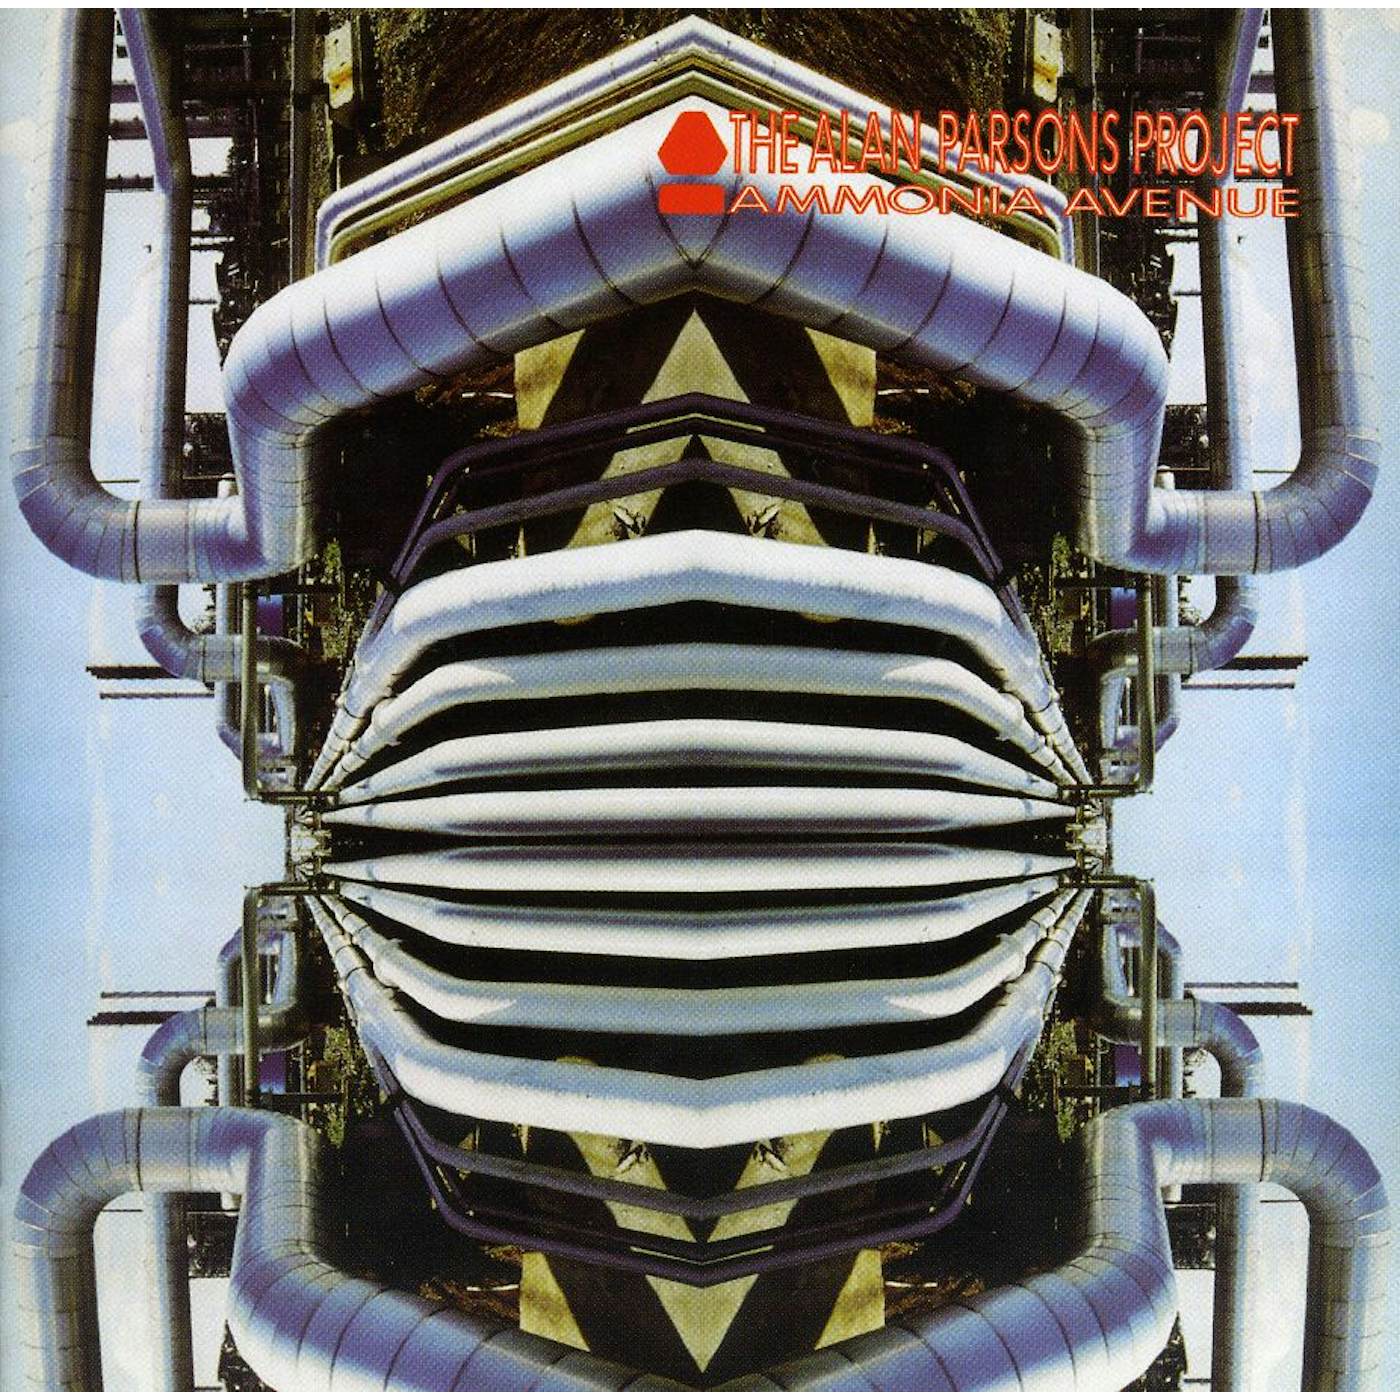 The Alan Parsons Project AMMONIA AVENUE CD